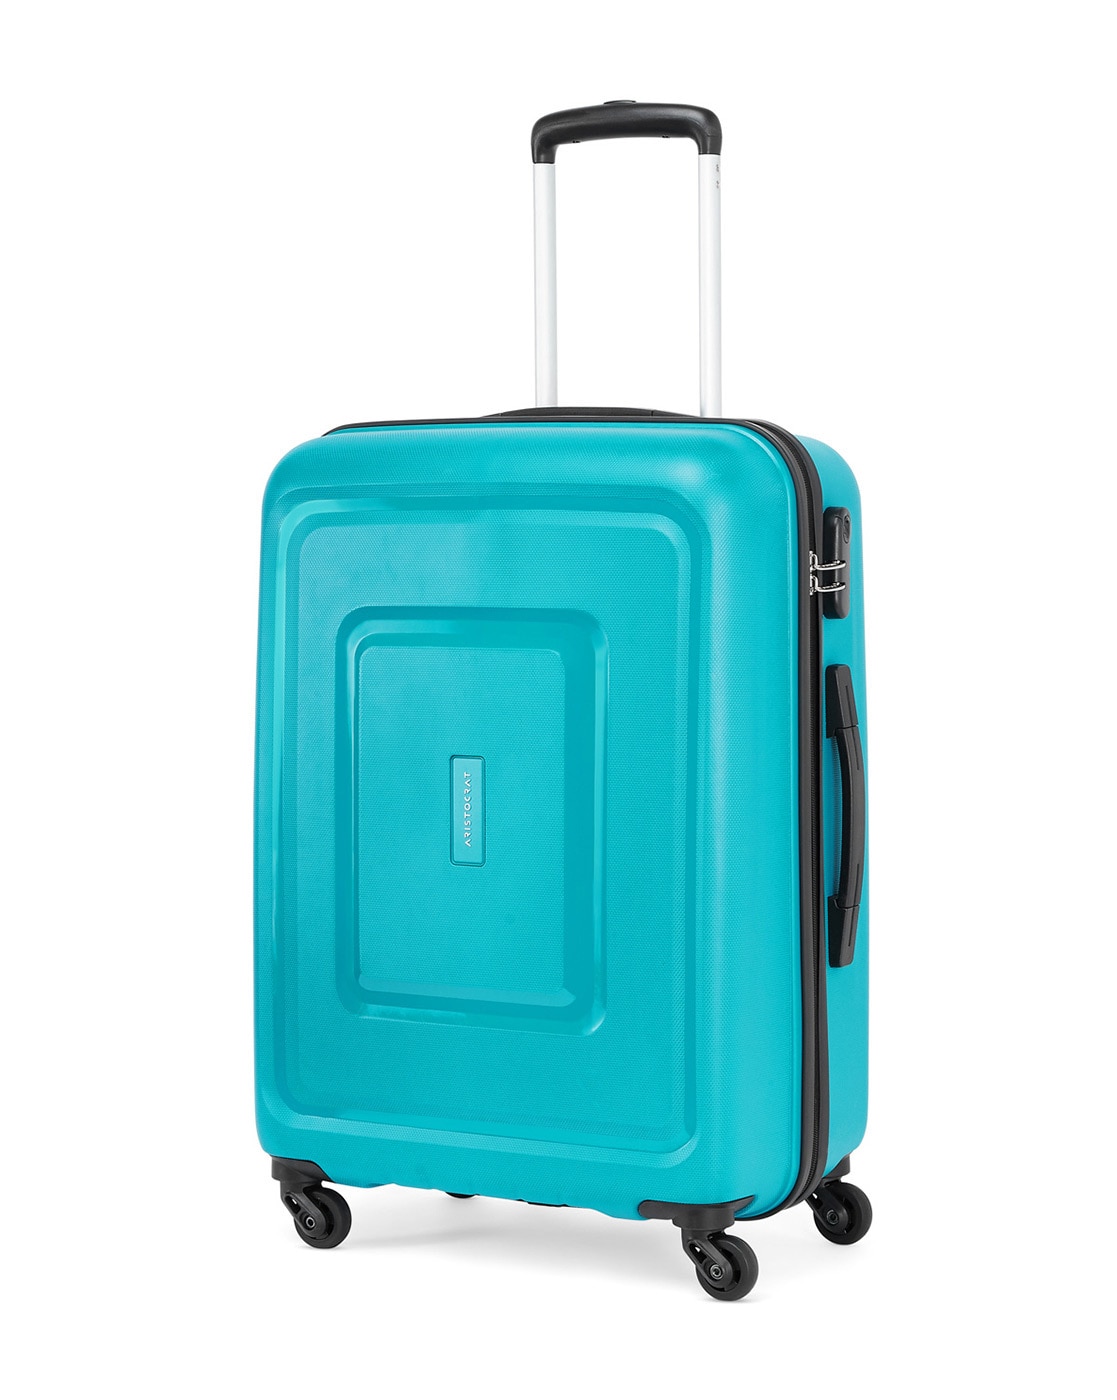 Aristocrat Nexon Strolly 55 Cm 360° | Trolley Bag, Suitcase for Travel, 4  Wheel Luggage for Men and Women, Polypropylene Hard Side Cabin and Check in  Bag (Teal Blue, Small) : Amazon.in: Fashion